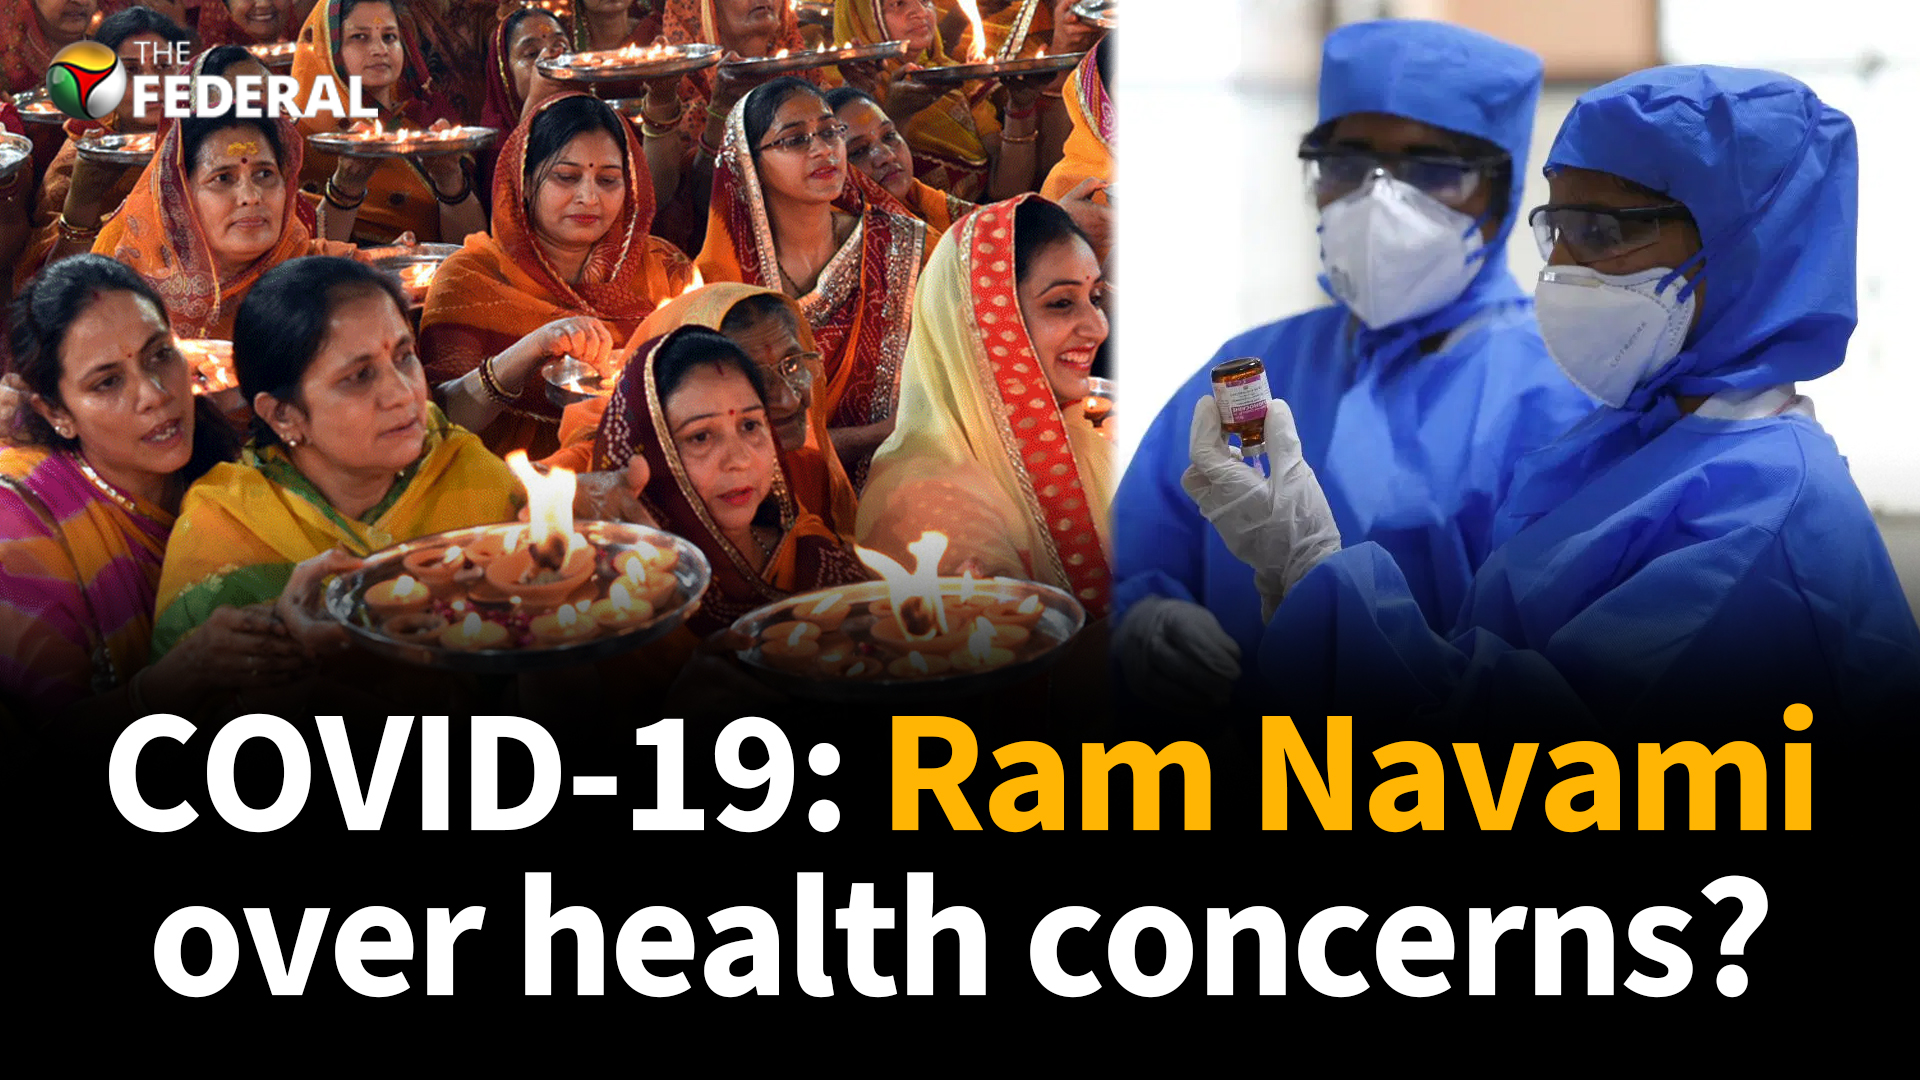 COVID-19 scene: What if govt places Ram Navami over health concerns?